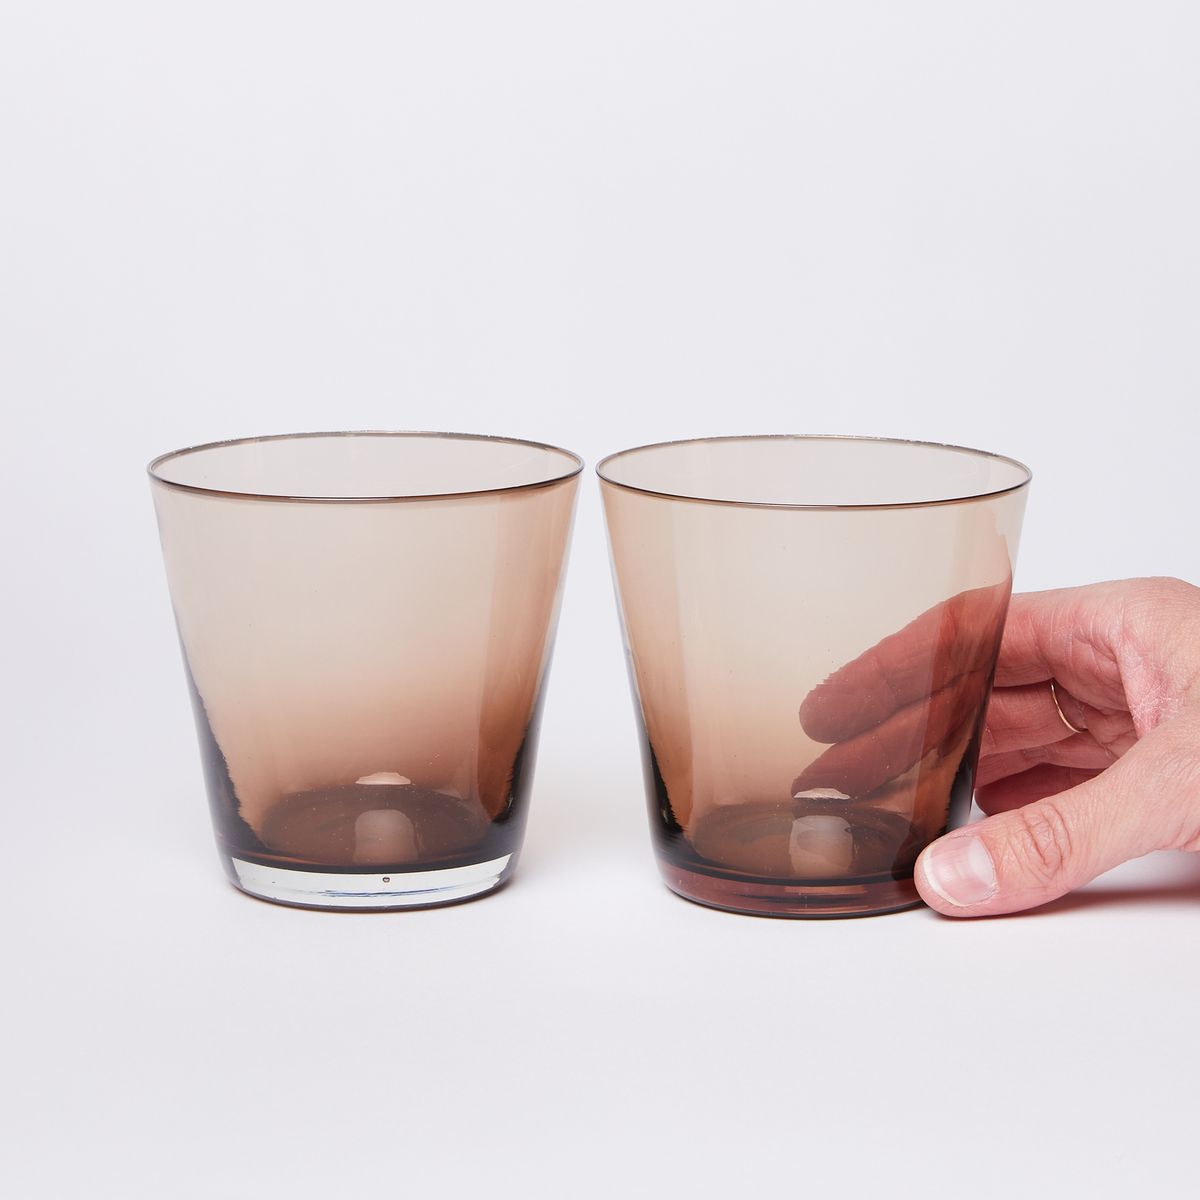 Two glass tumblers that with a brown gradient that lightens towards the wider rim, with a hand holding the one of the right